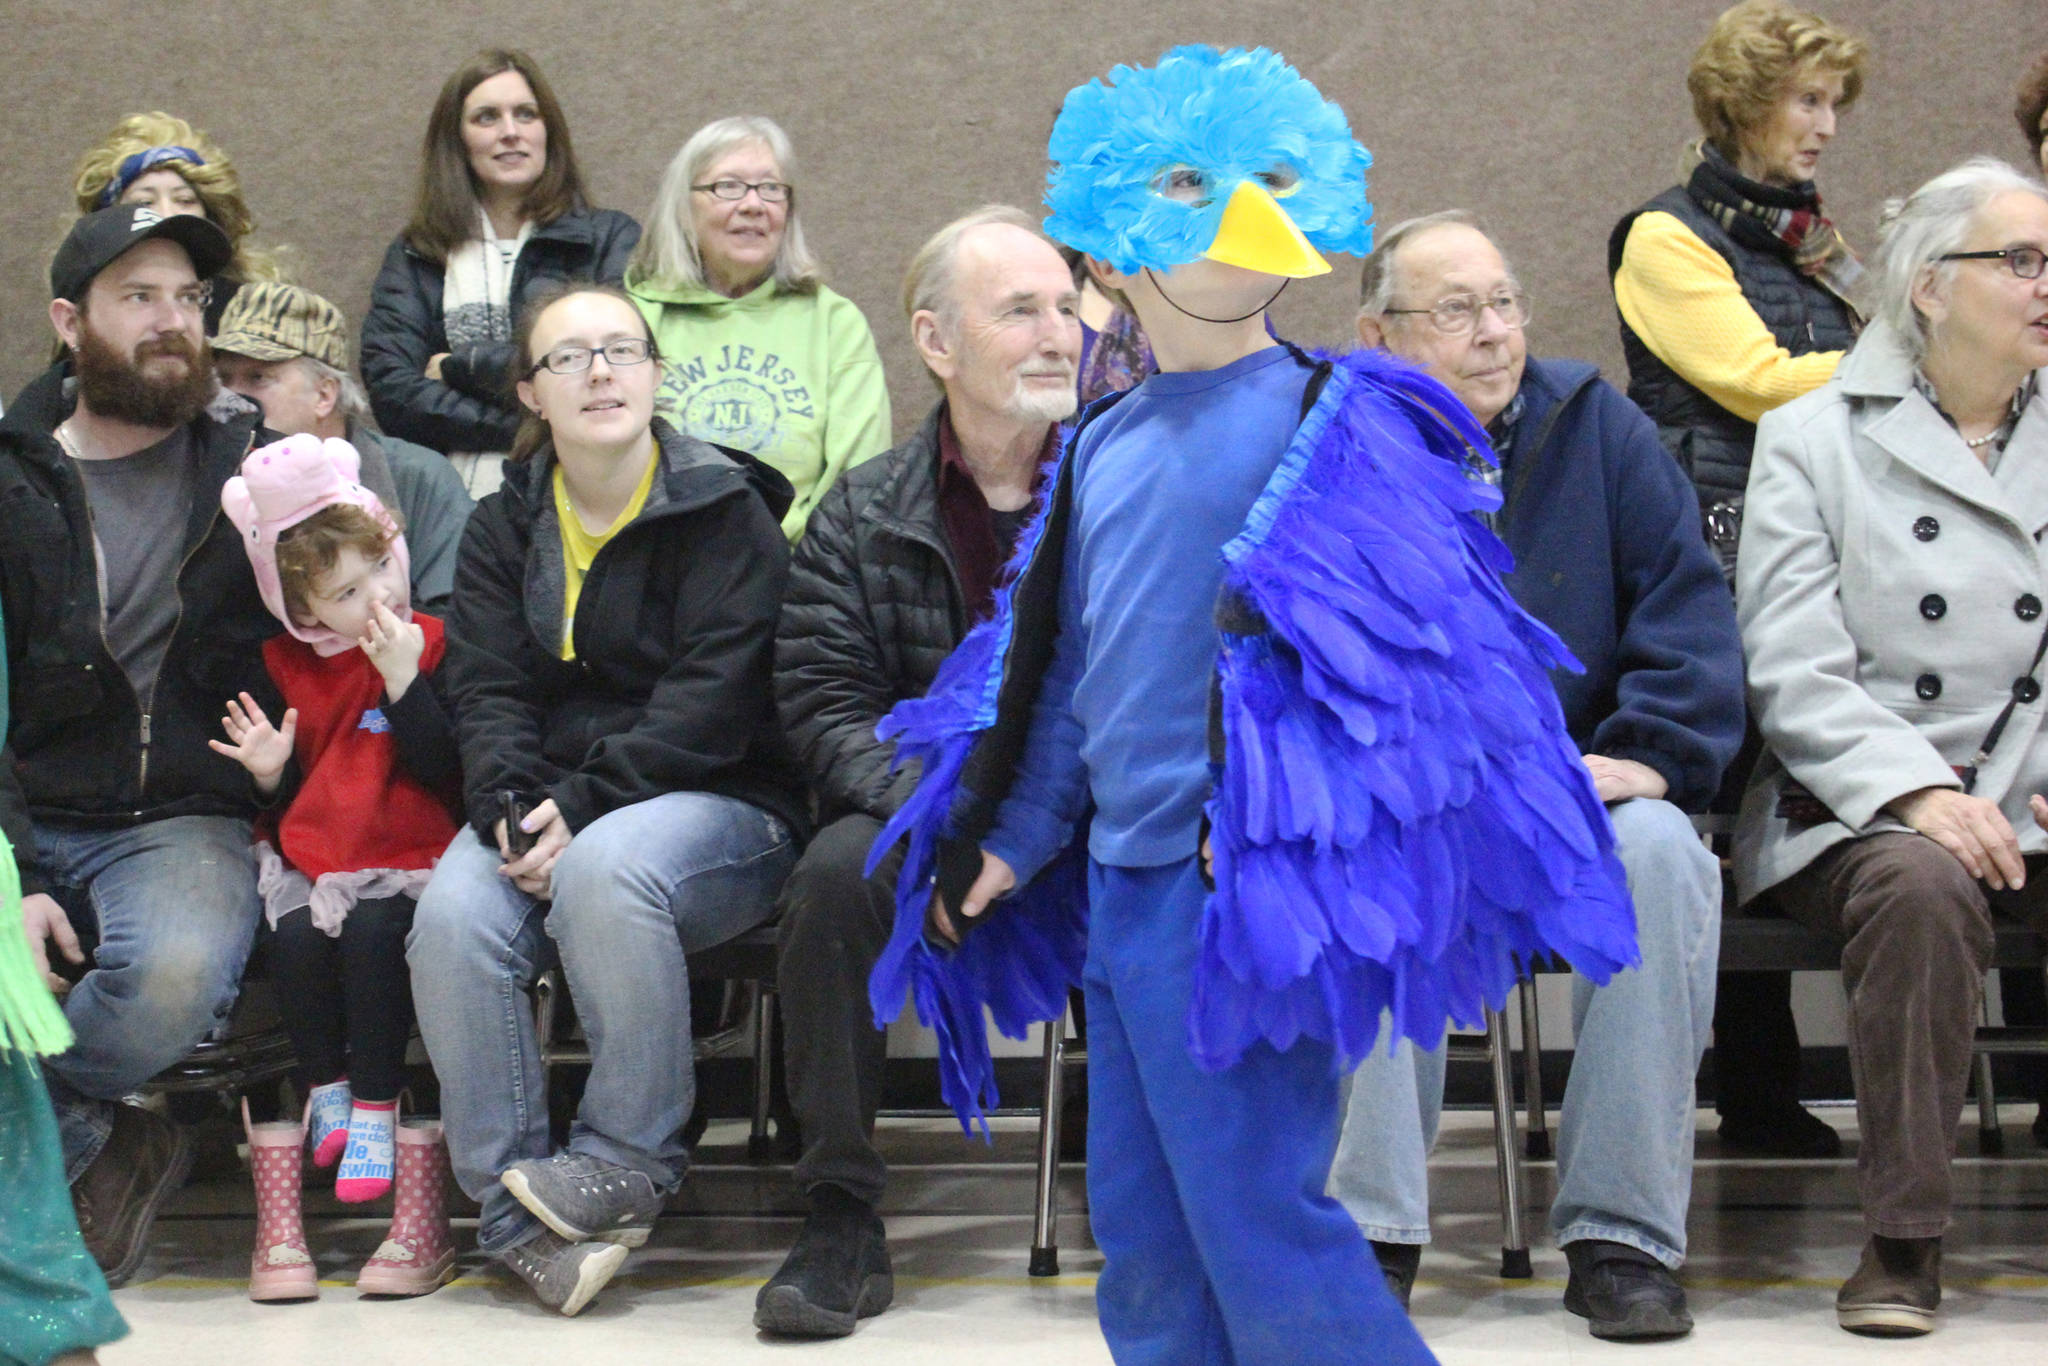 Elementary school student Cohen McBride walks as a blue bird in the Paul Banks Elementary School Halloween costume parade Tuesday, Oct. 31, 2017 at the school in Homer, Alaska. (Photo by Megan Pacer/Homer News)